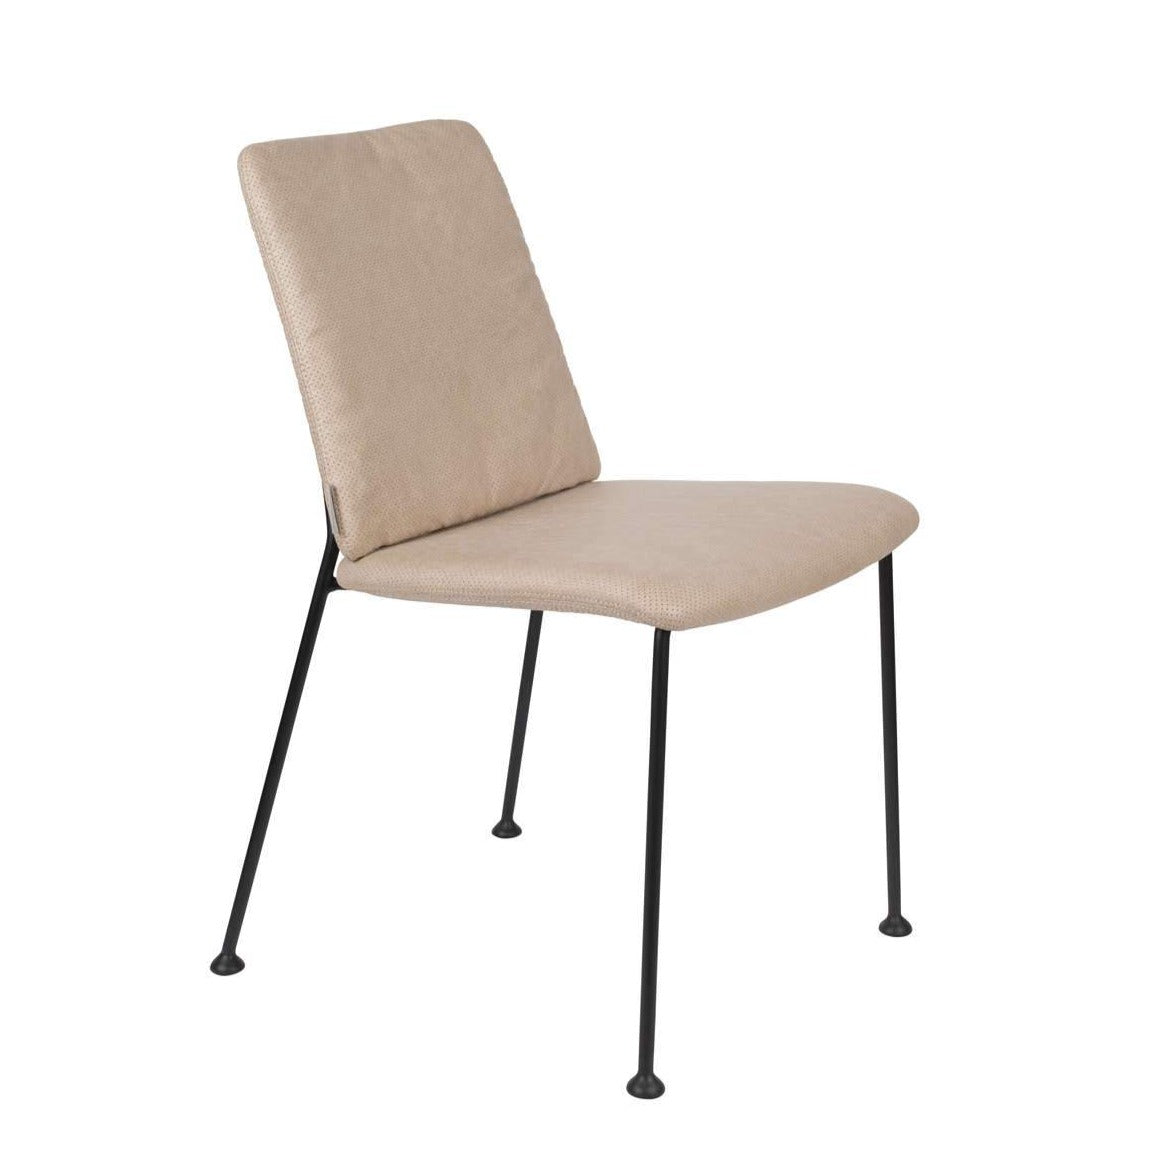 The Fab chair can transform a modern dining room, a classic office and a Scandinavian salon into class with class. This armchair refers to earlier years when his task was only to be comfortable. Now, when the design was focused and appreciated, he gained a new life. Thanks to its minimalist appearance and contrasting comfortable mountain with slender straight legs, it fits almost every space. It enriches them thanks to its subtlety.